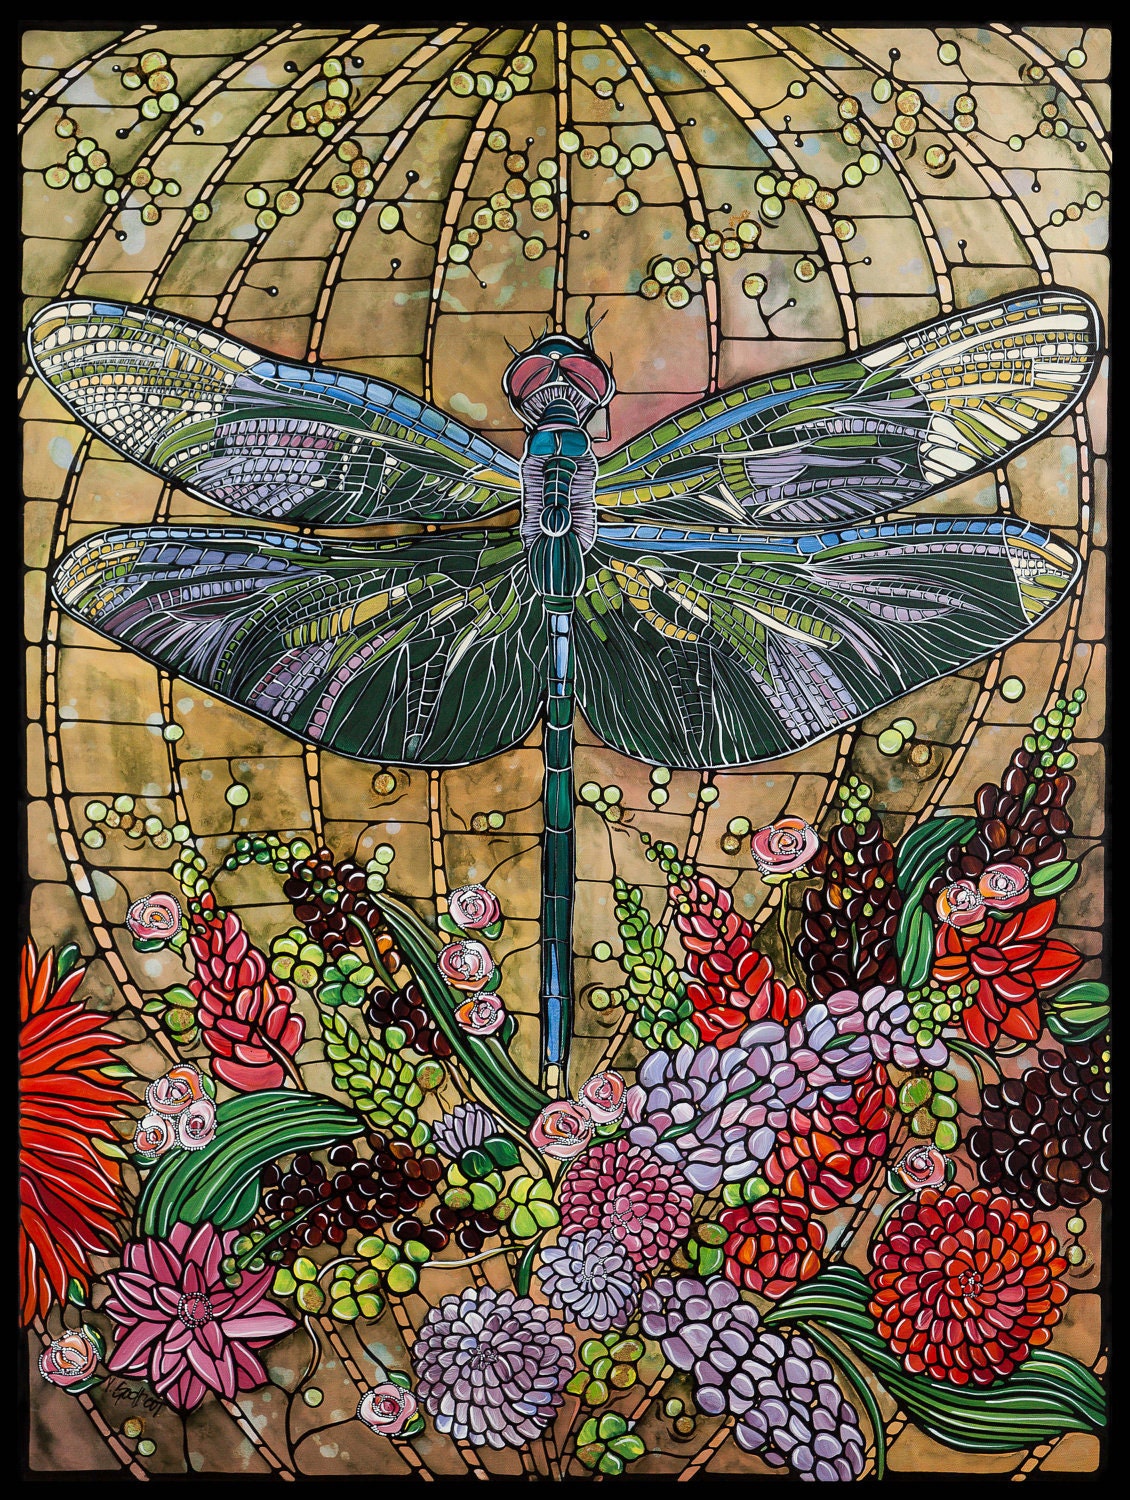 Popular items for Dragonfly art on Etsy